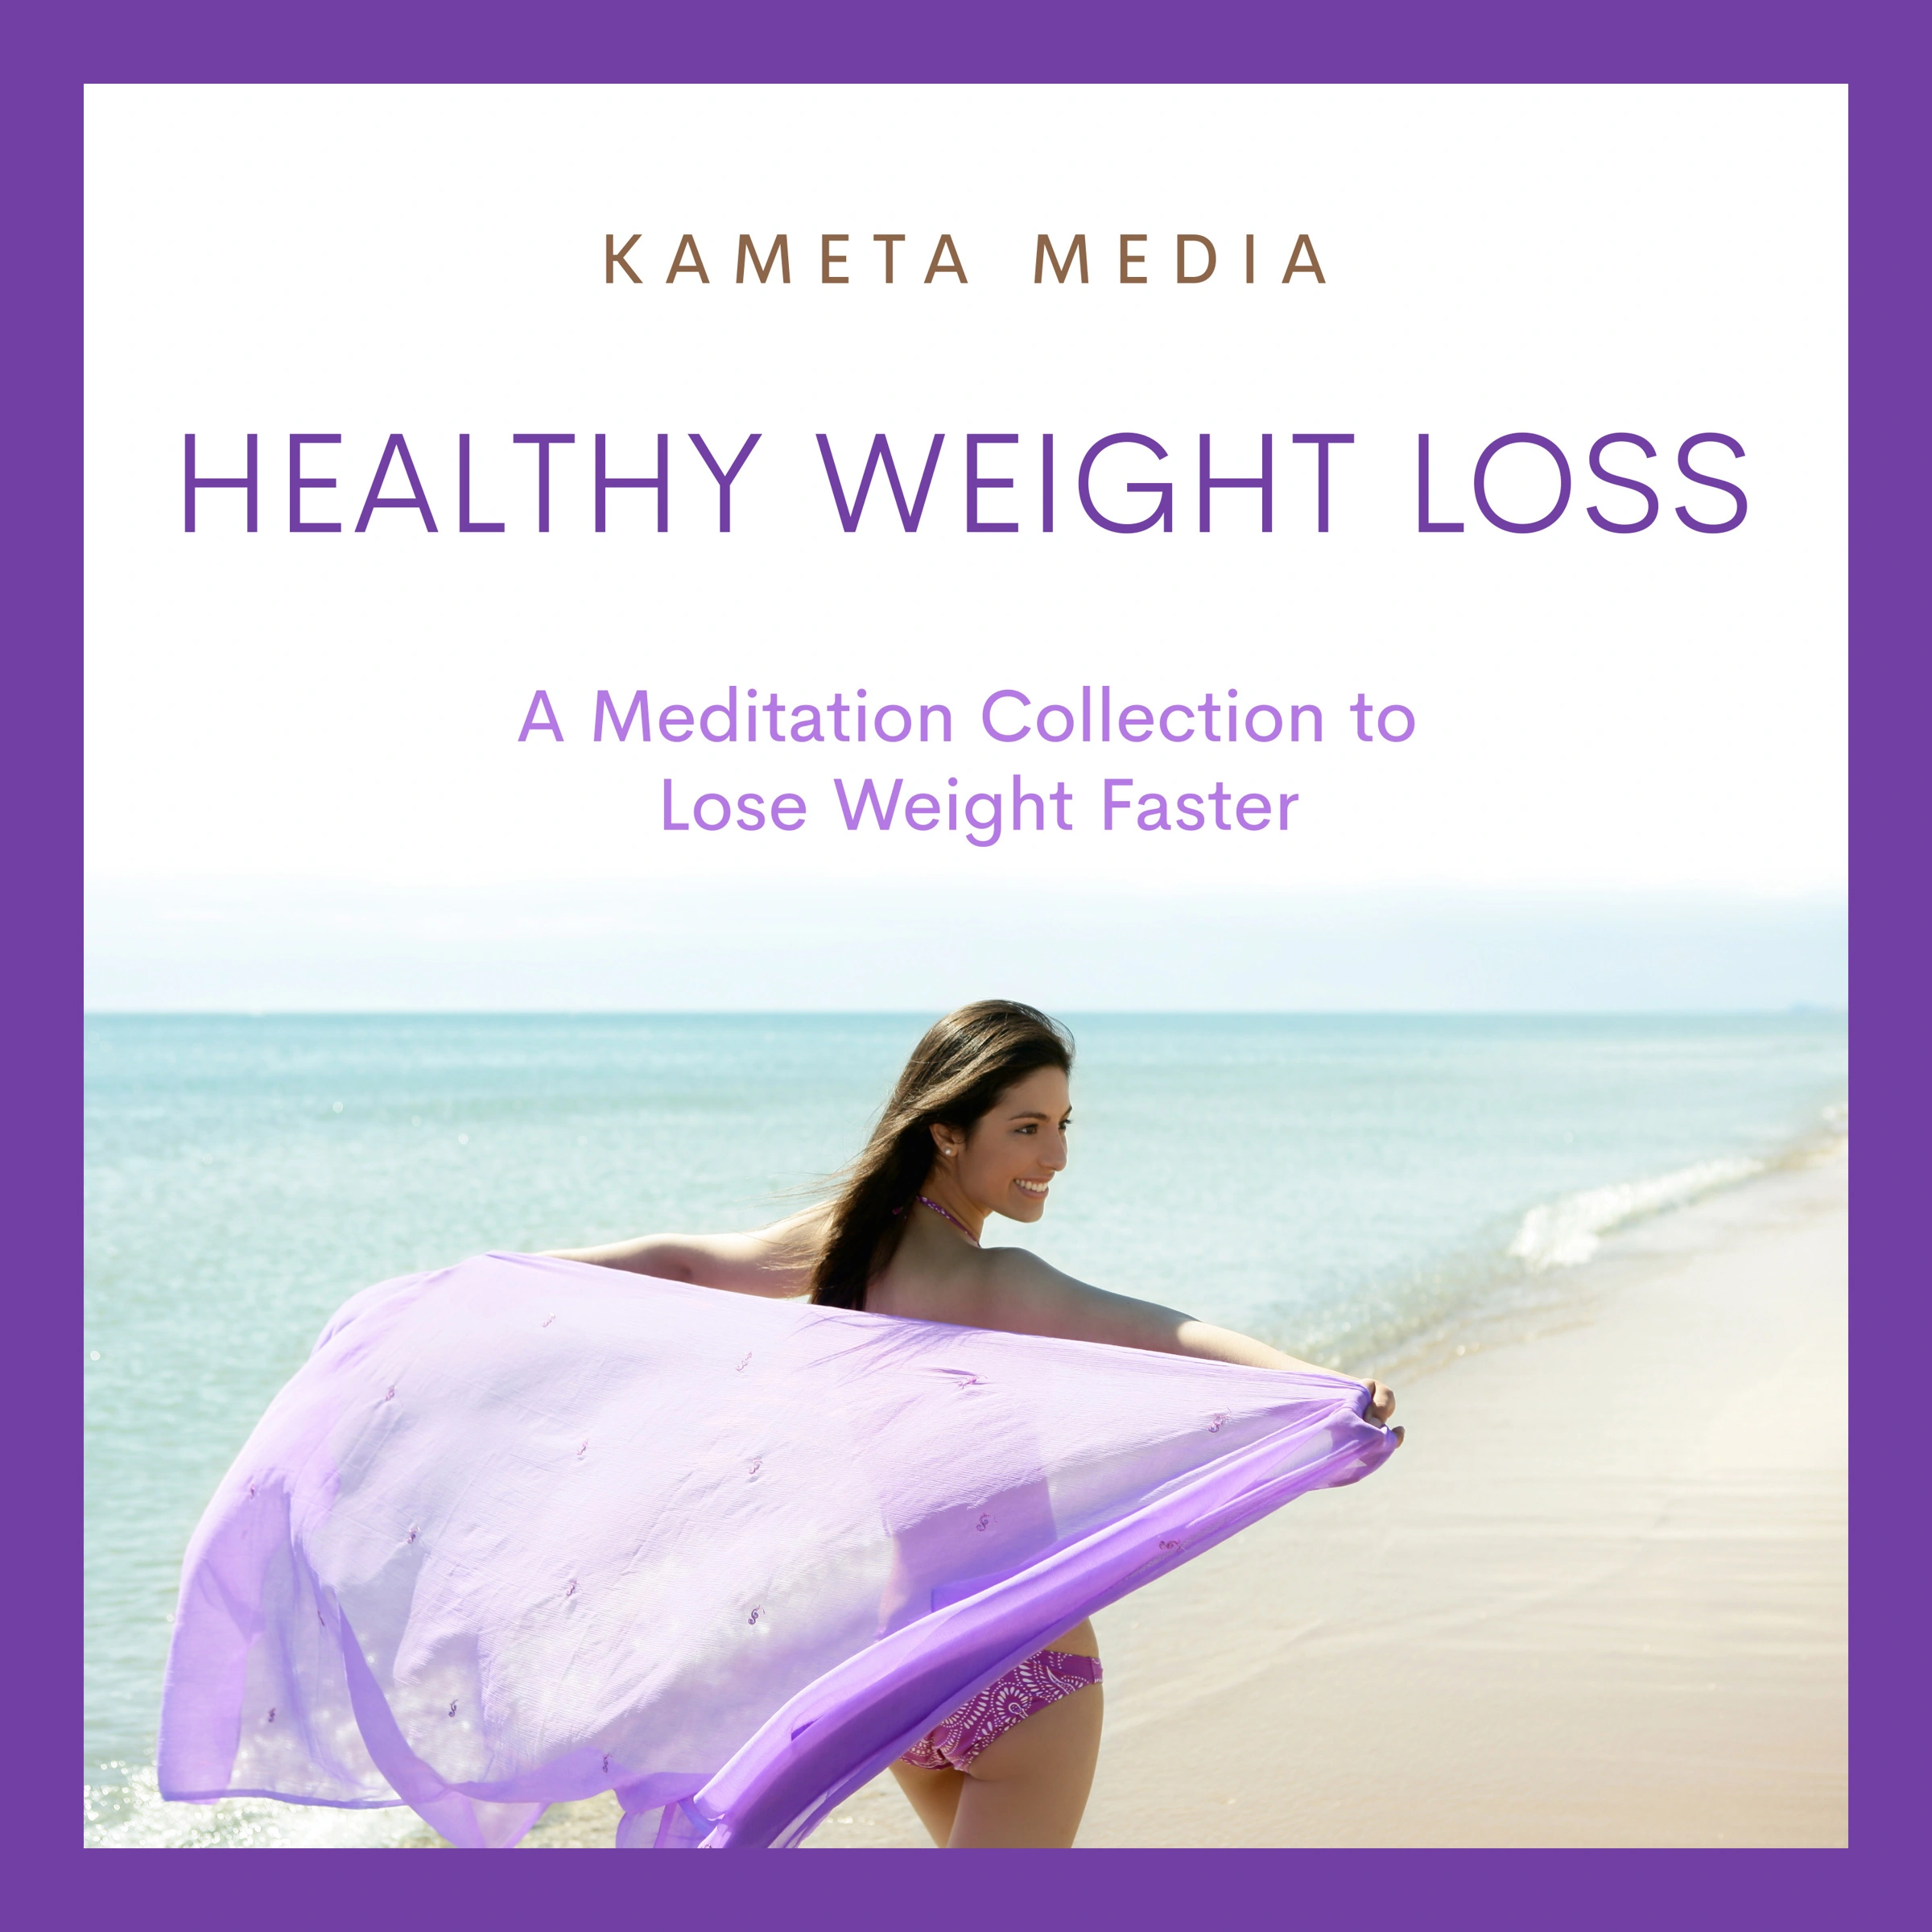 Healthy Weight Loss: A Meditation Collection to Lose Weight Faster Audiobook by Kameta Media